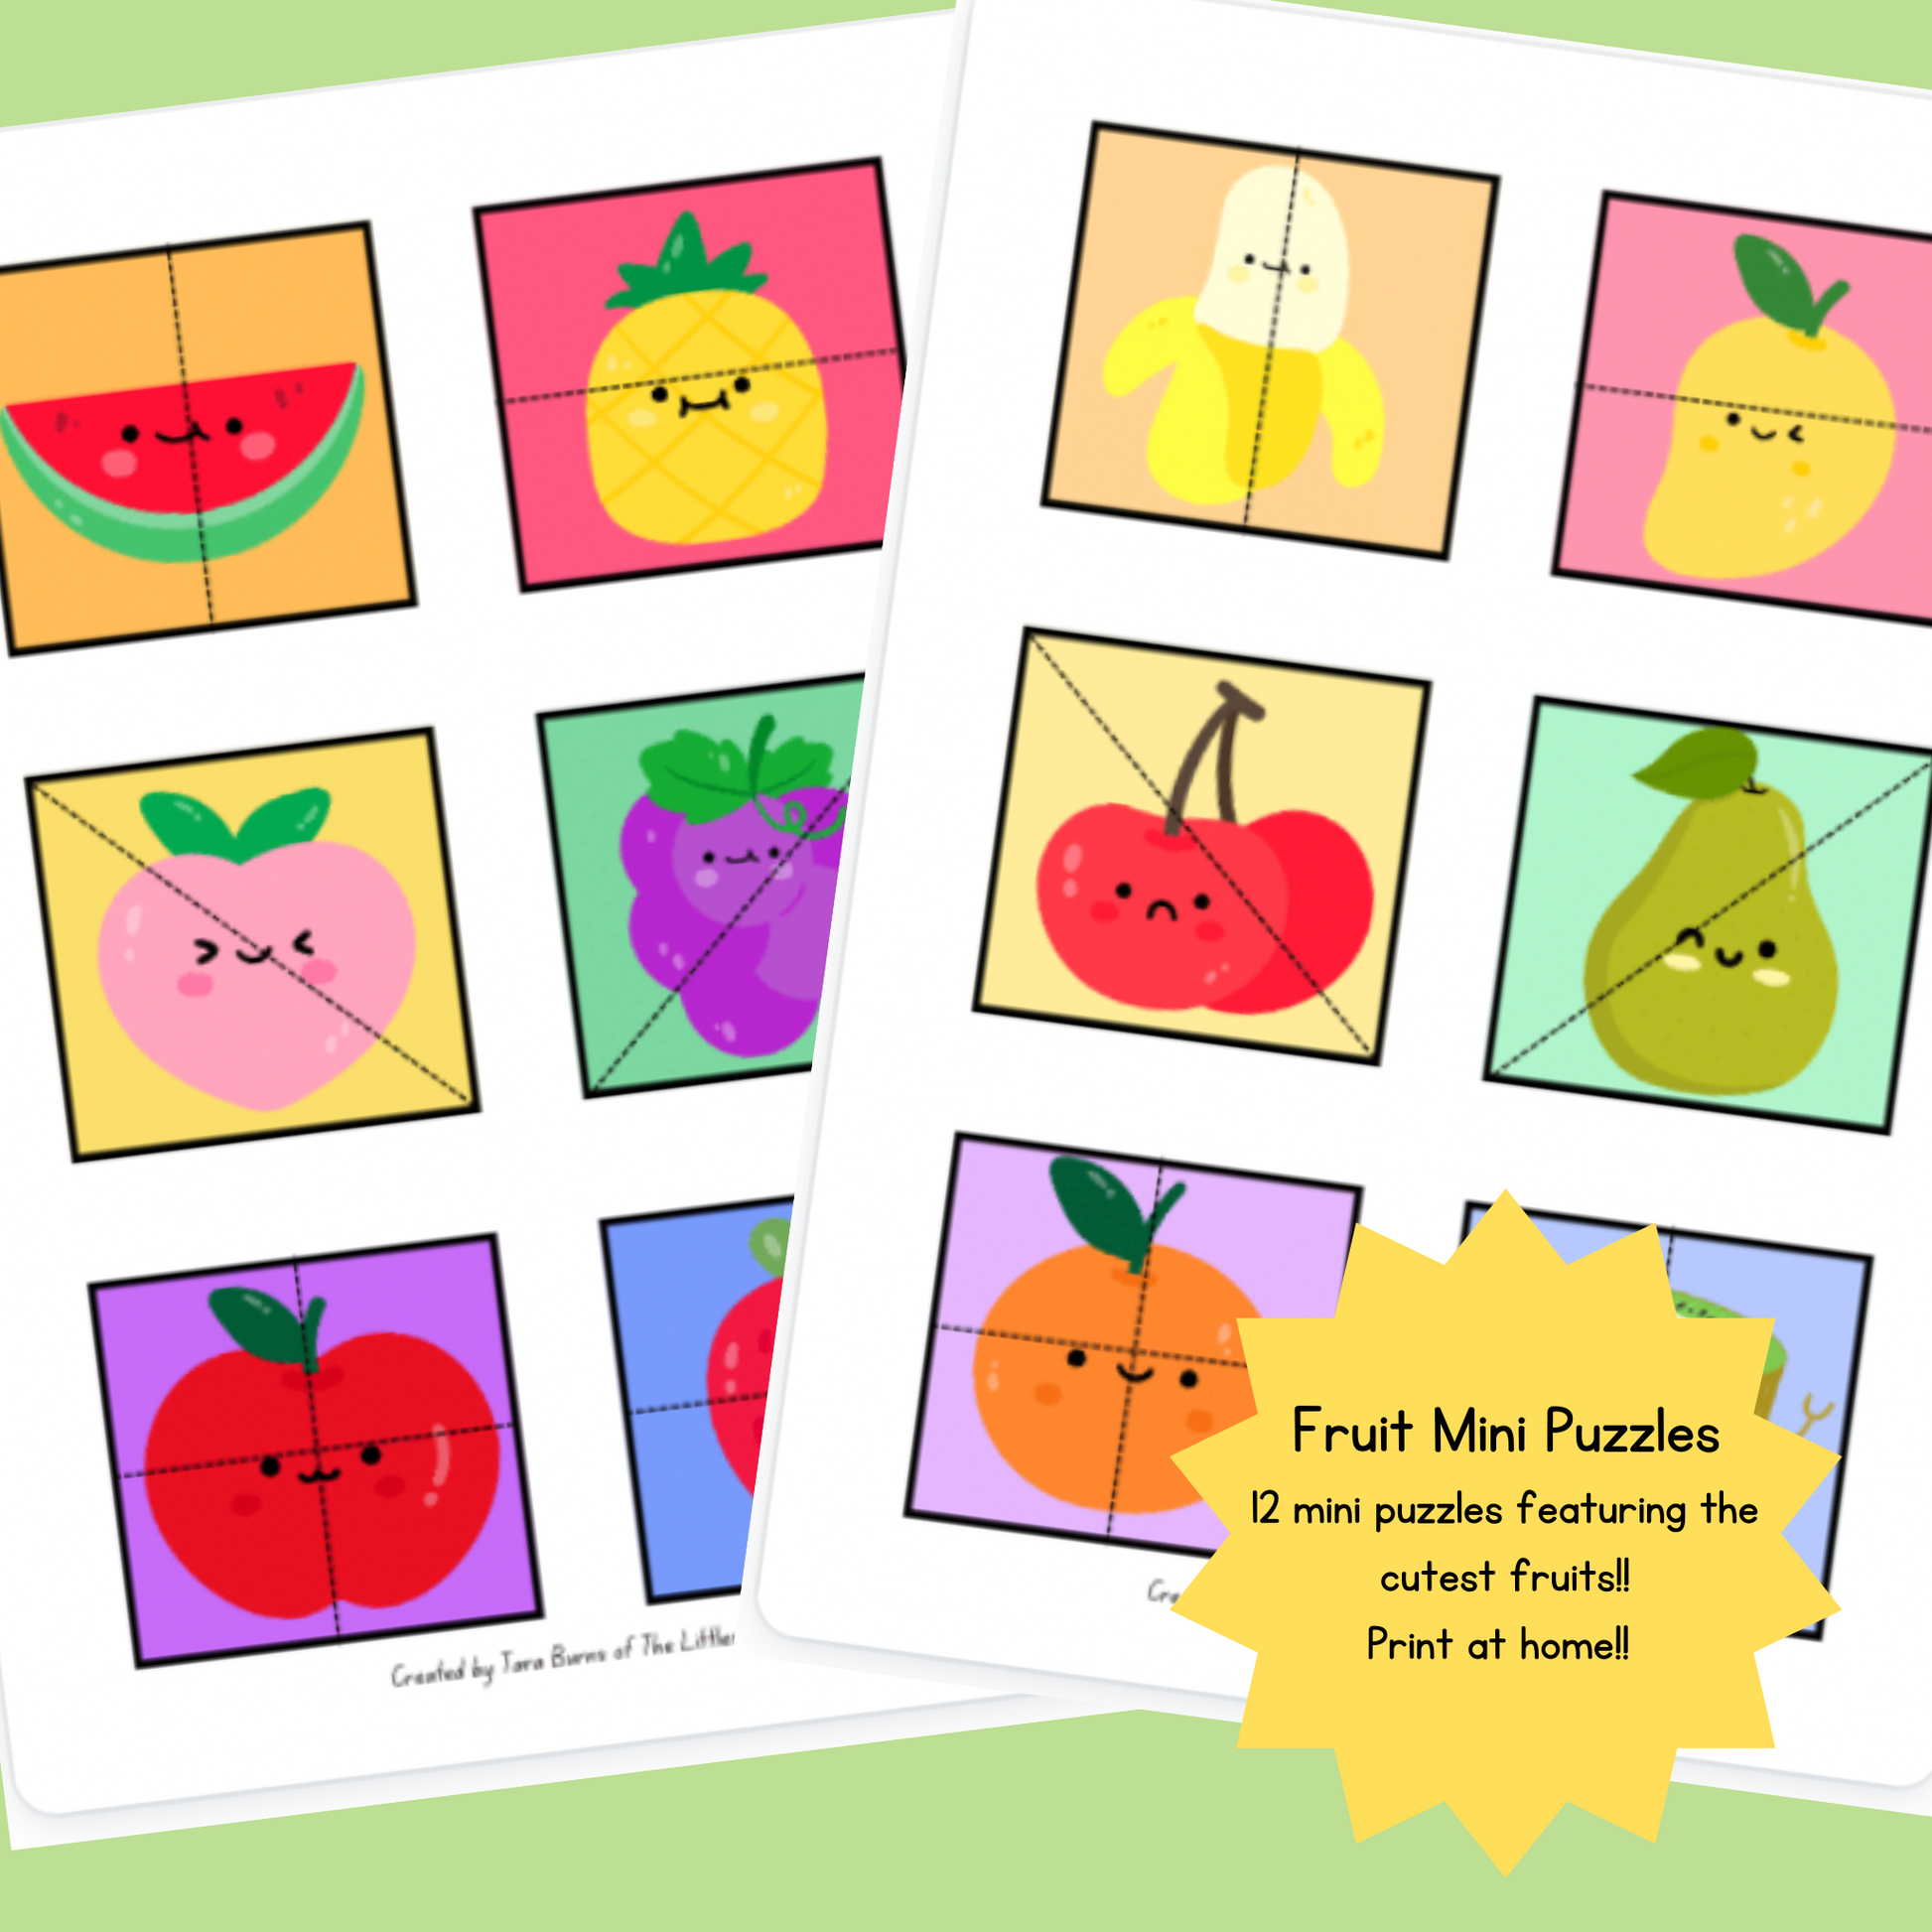 12 simple puzzles with cute brightly coloured fruit images.